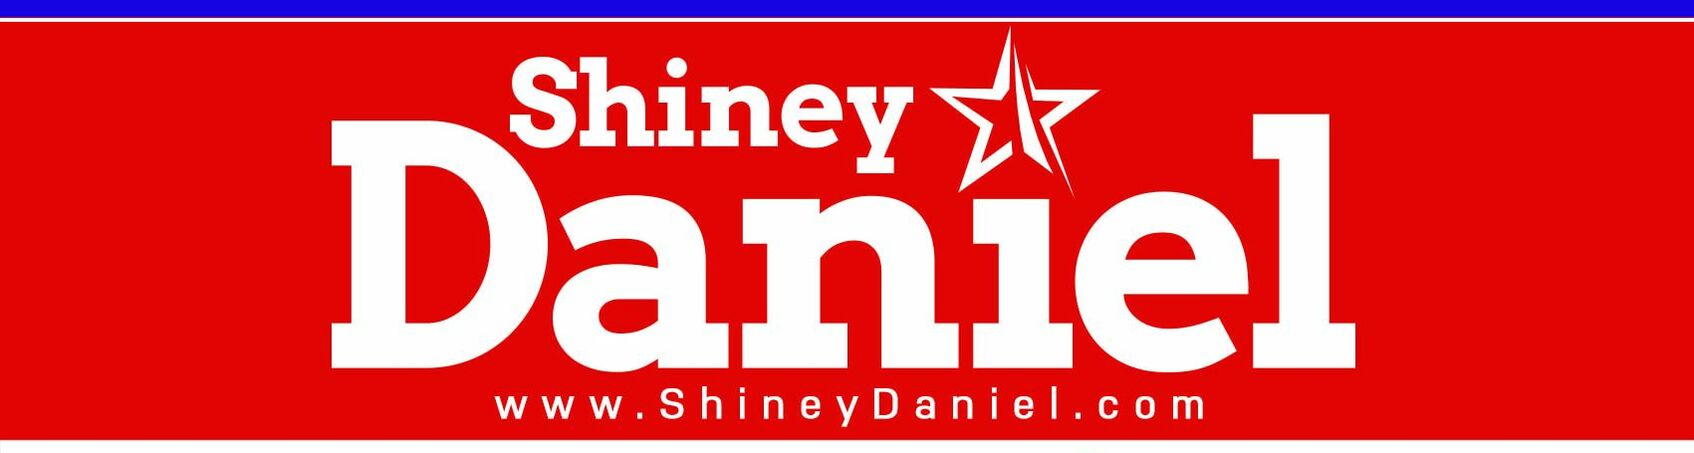 Shiney Daniel for Sunnyvale Town Council Place 2